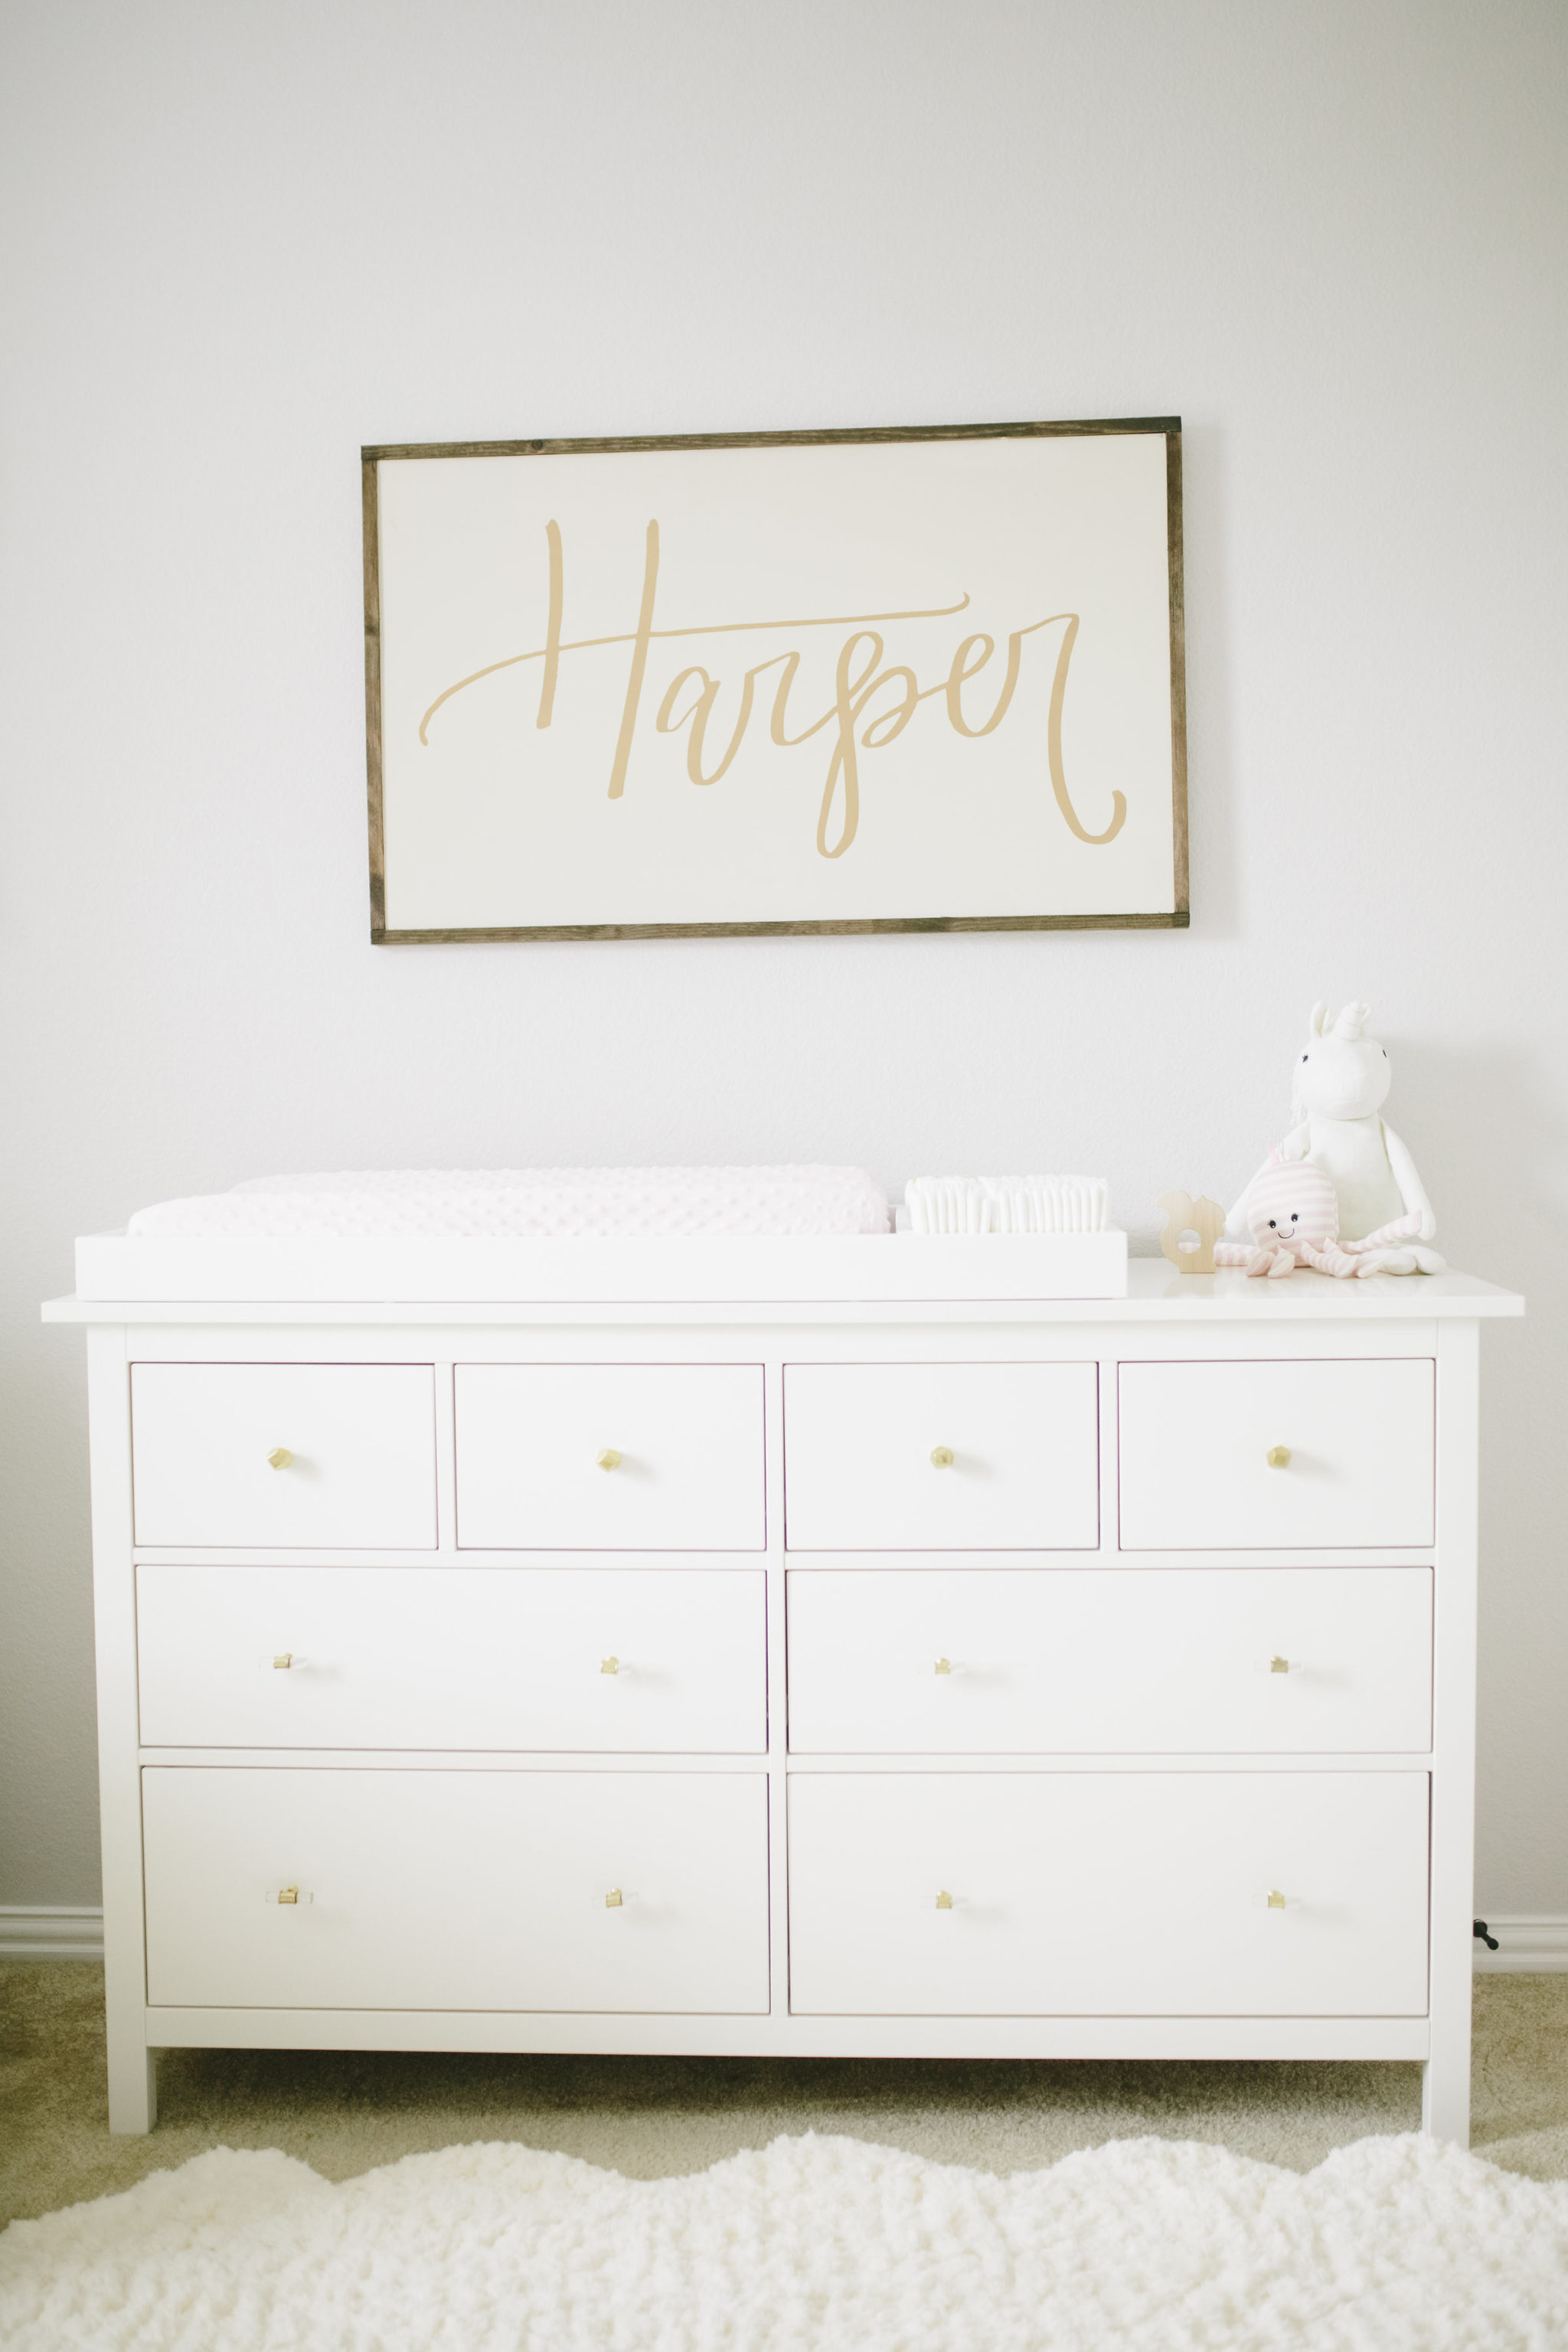 Painted Name Sign over Dresser